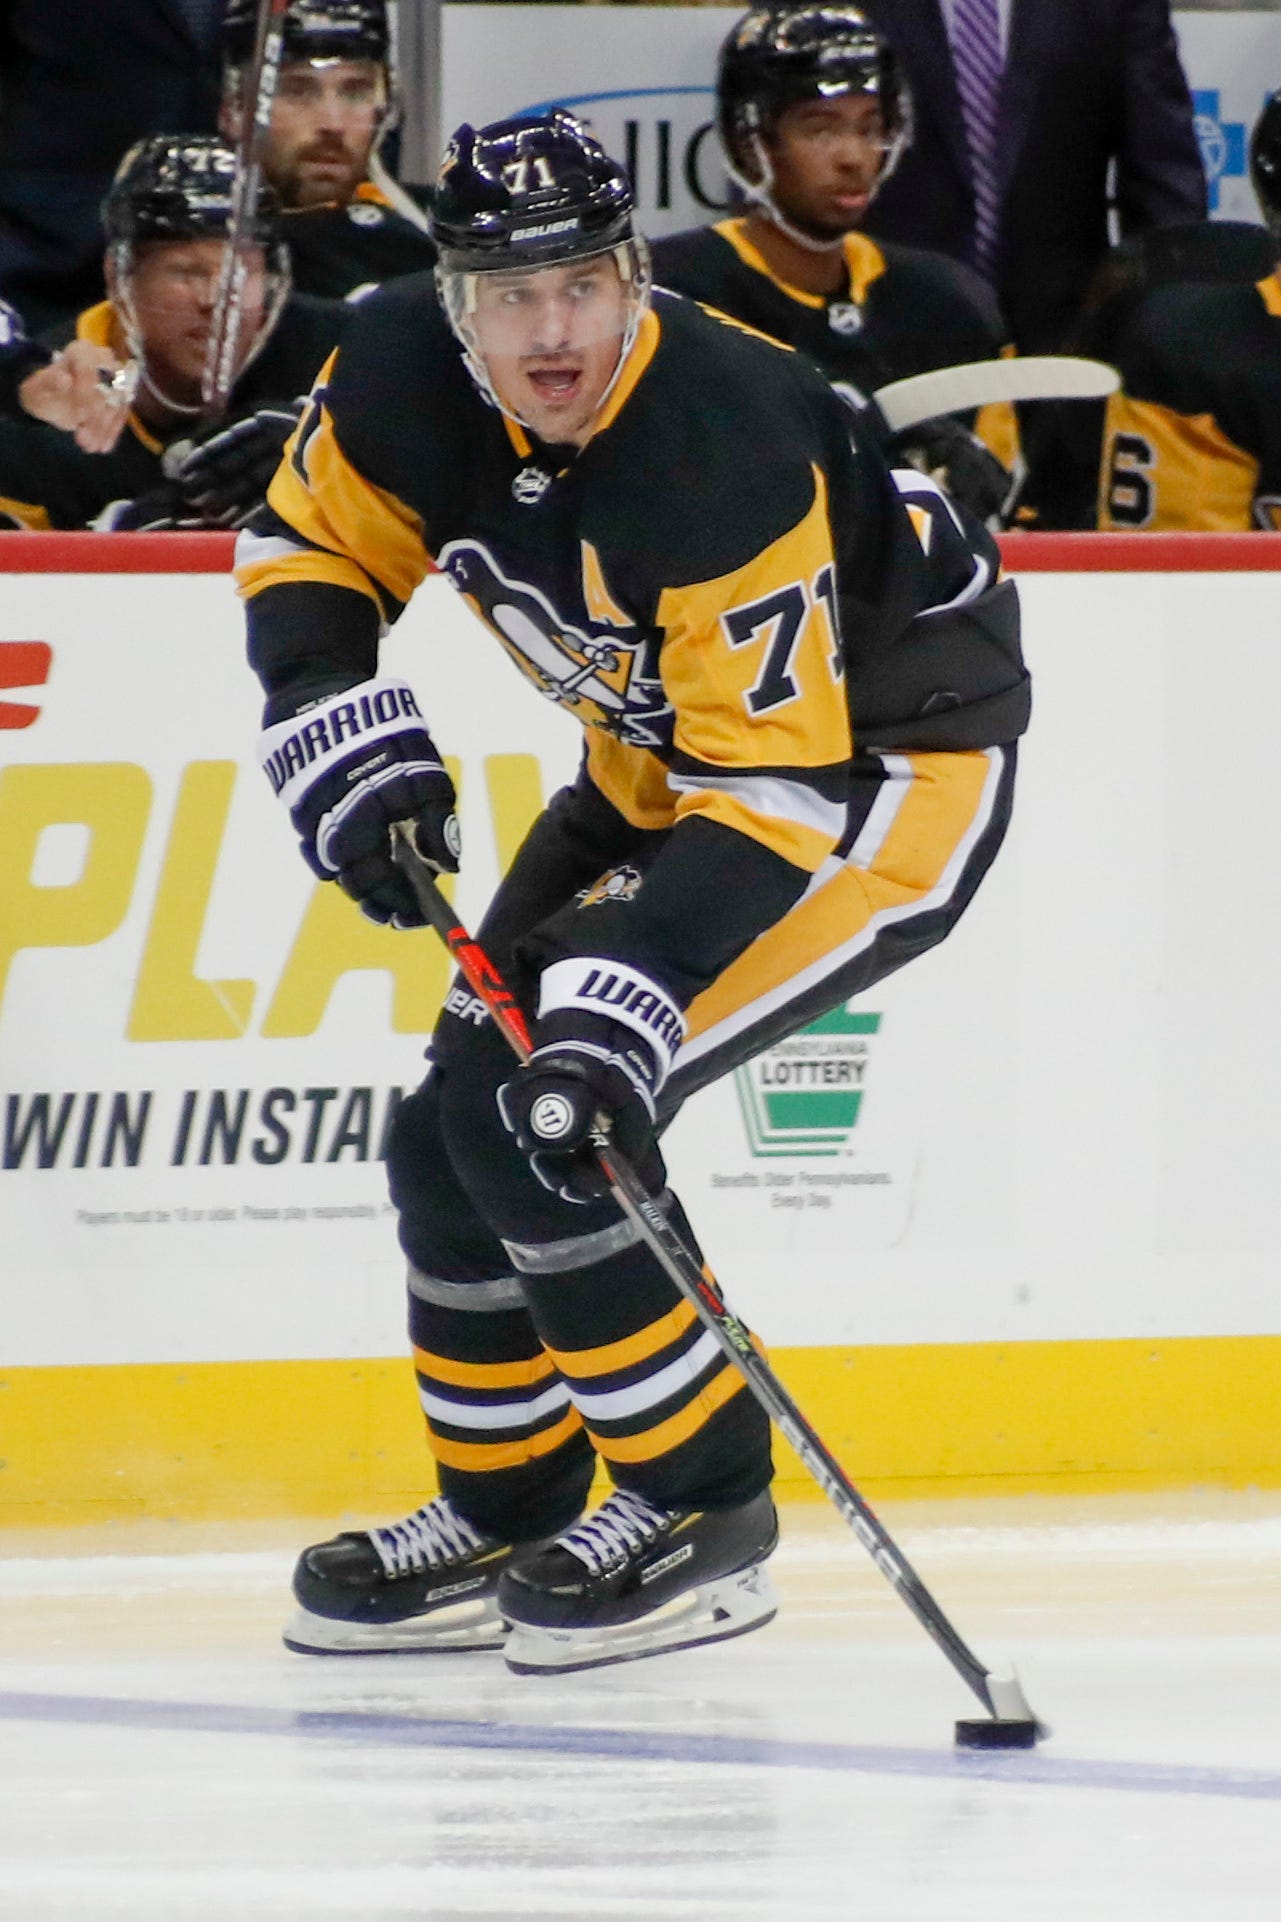 Penguins lose Evgeni Malkin with long-term injury: Will GM Jim Rutherford look for a trade?